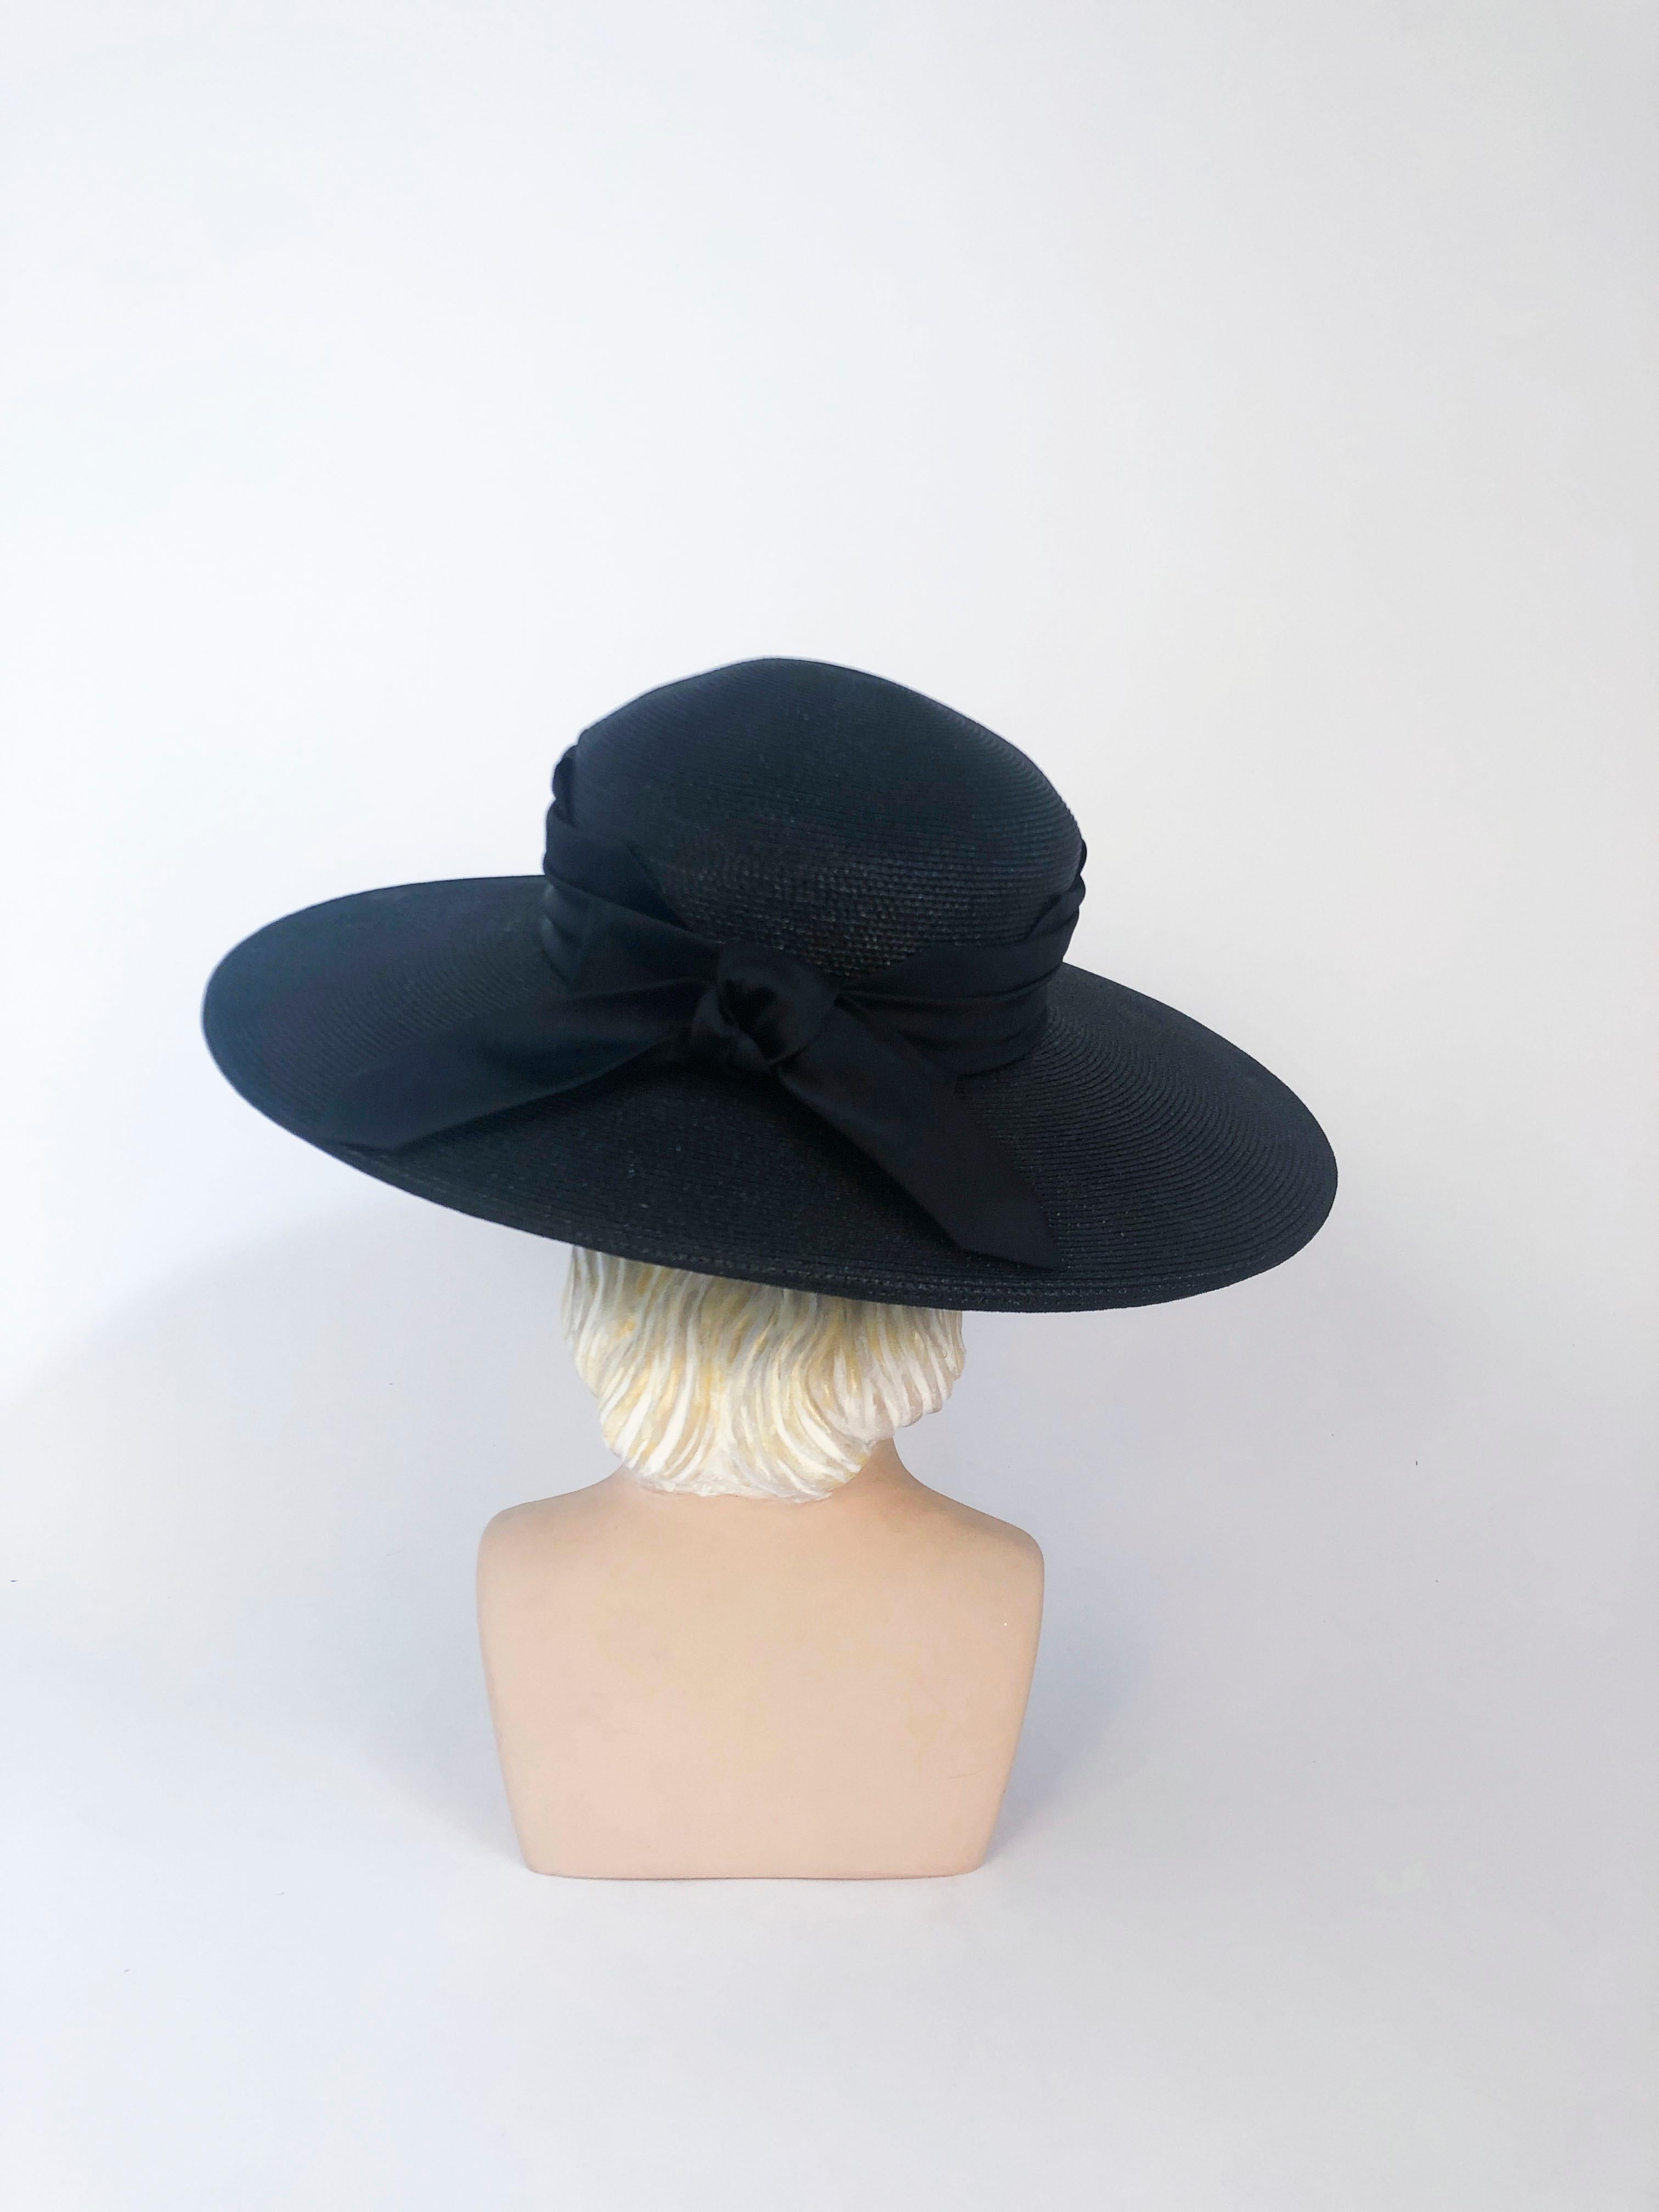 Women's 1960's Black Straw Hat with Wide Tiered Satin Band and Bow